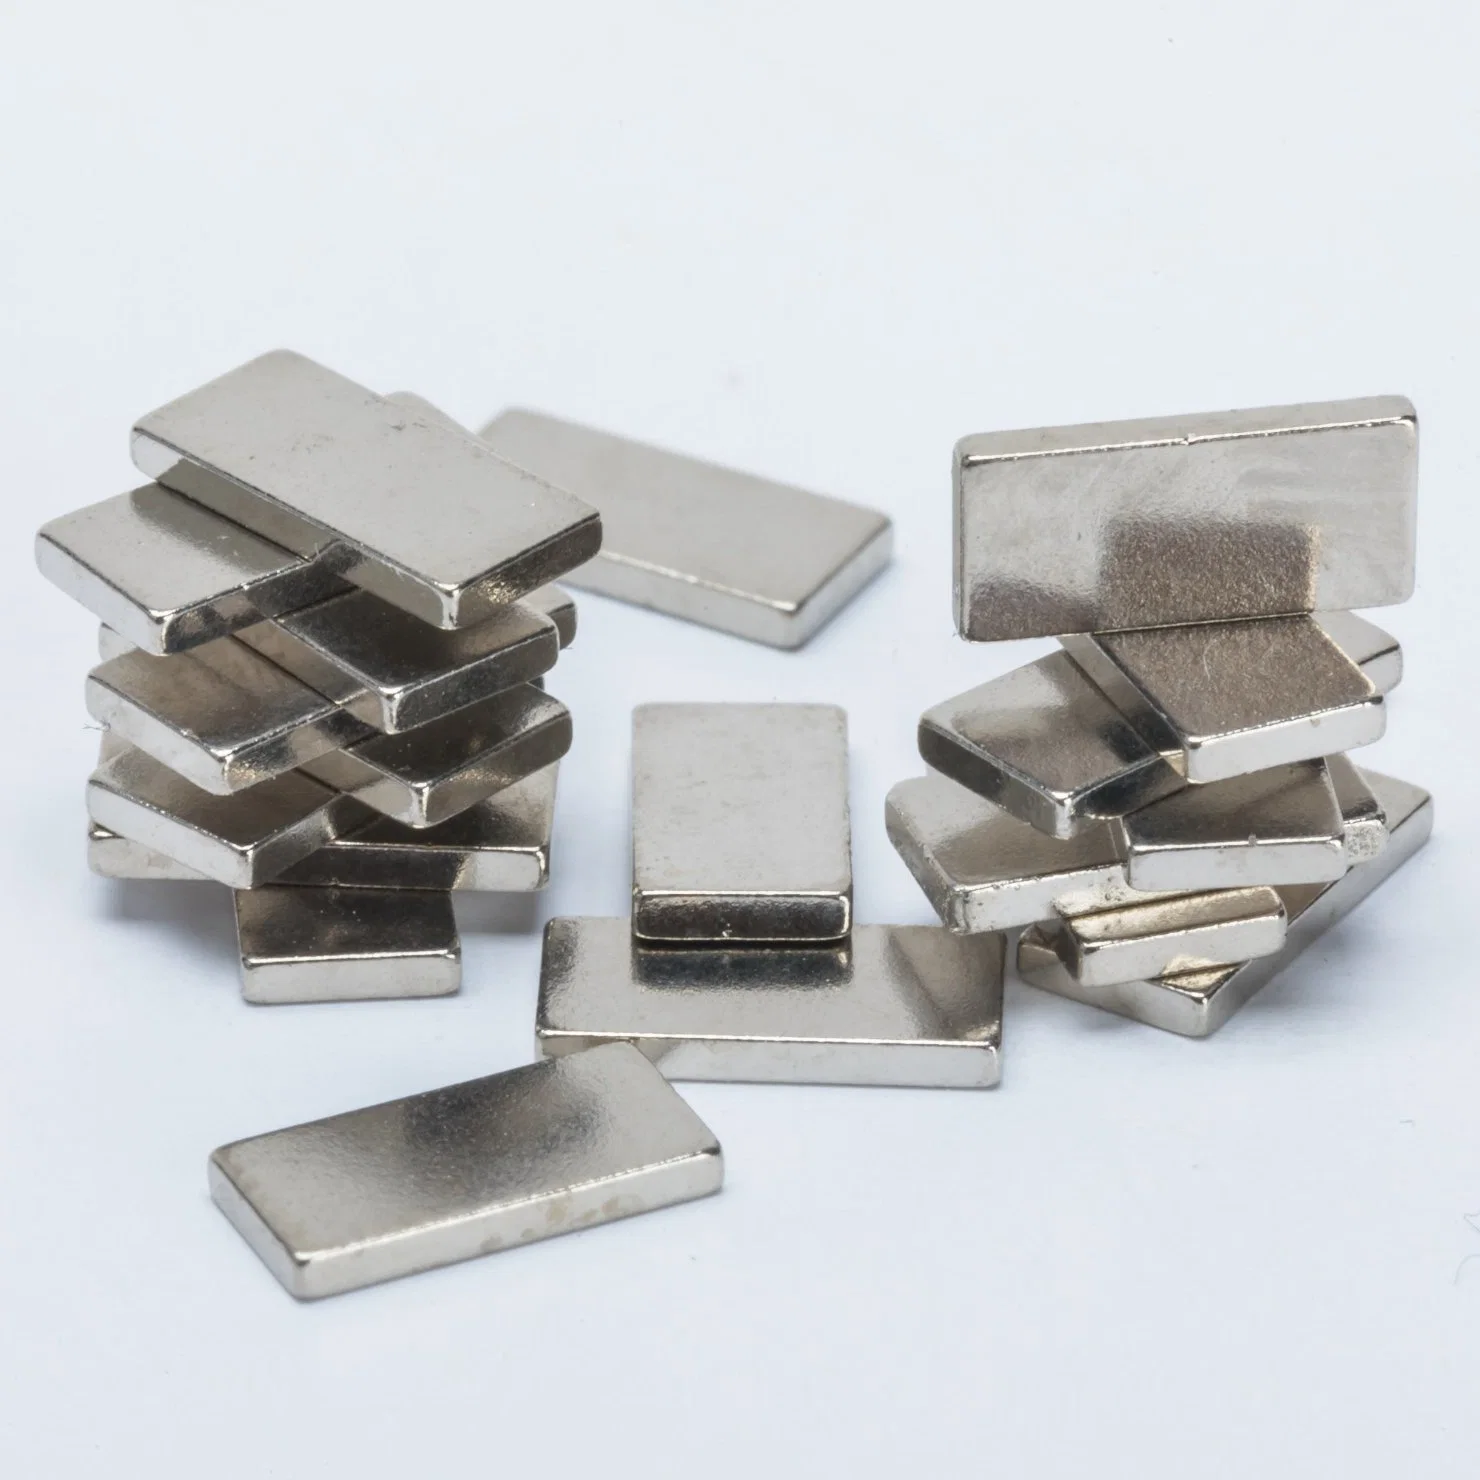 Free Samples NdFeB Magnetic Factory Customize Permanent Magnet Neodymium Mass Production Rectangular 20*10*2 10*5*2 Strong Magnet for Packing